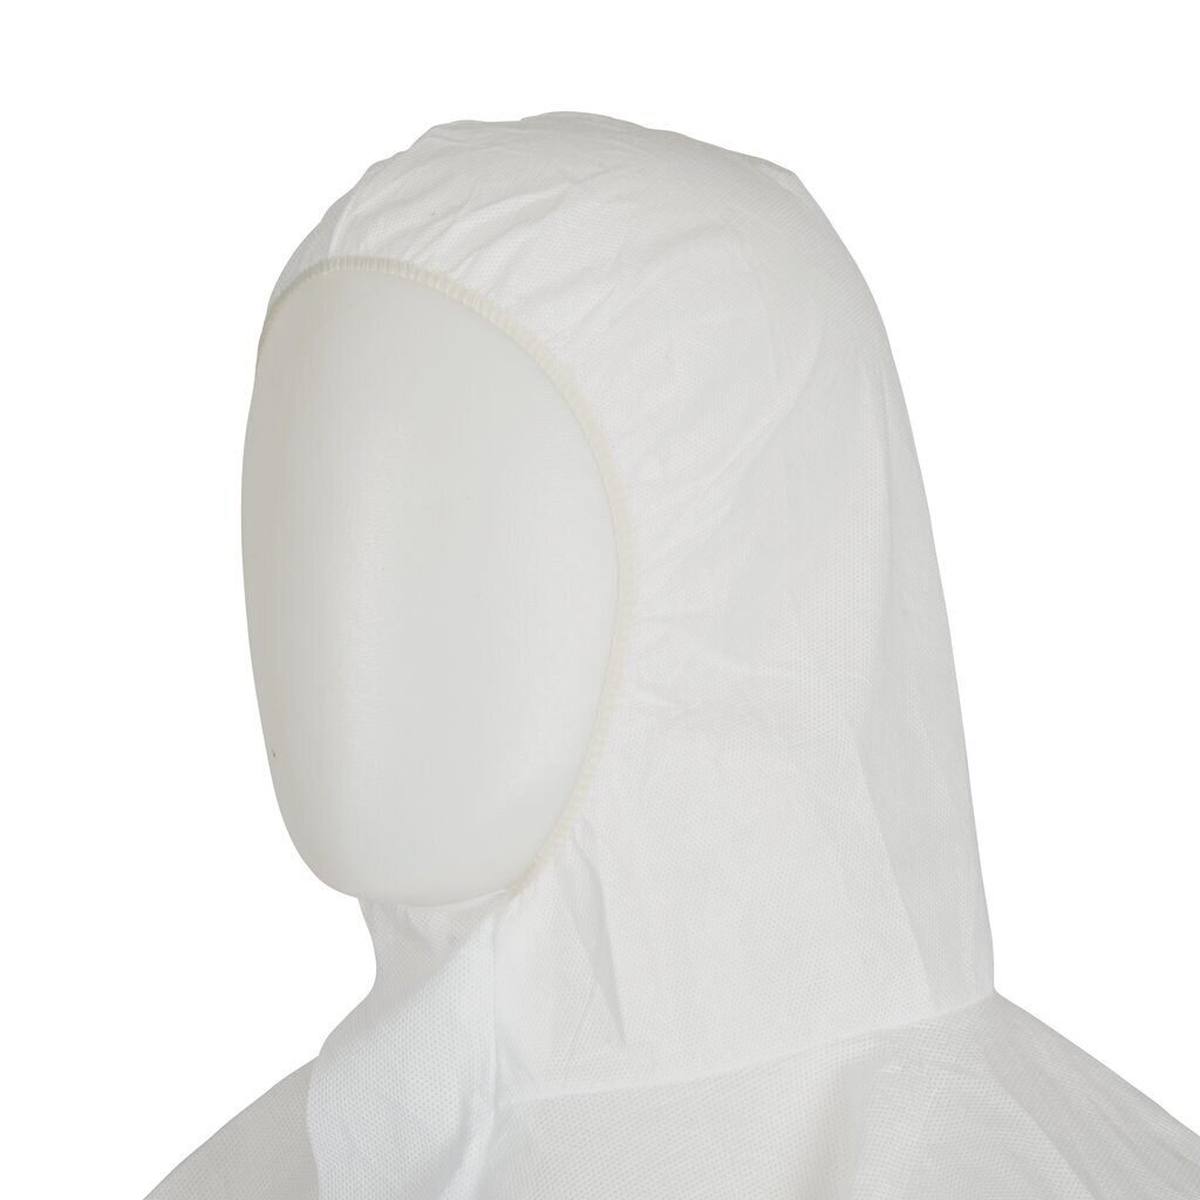 3M 4515W Protective suit, white, TYPE 5/6, size 3XL, material SMMS low-lint, elasticated cuffs